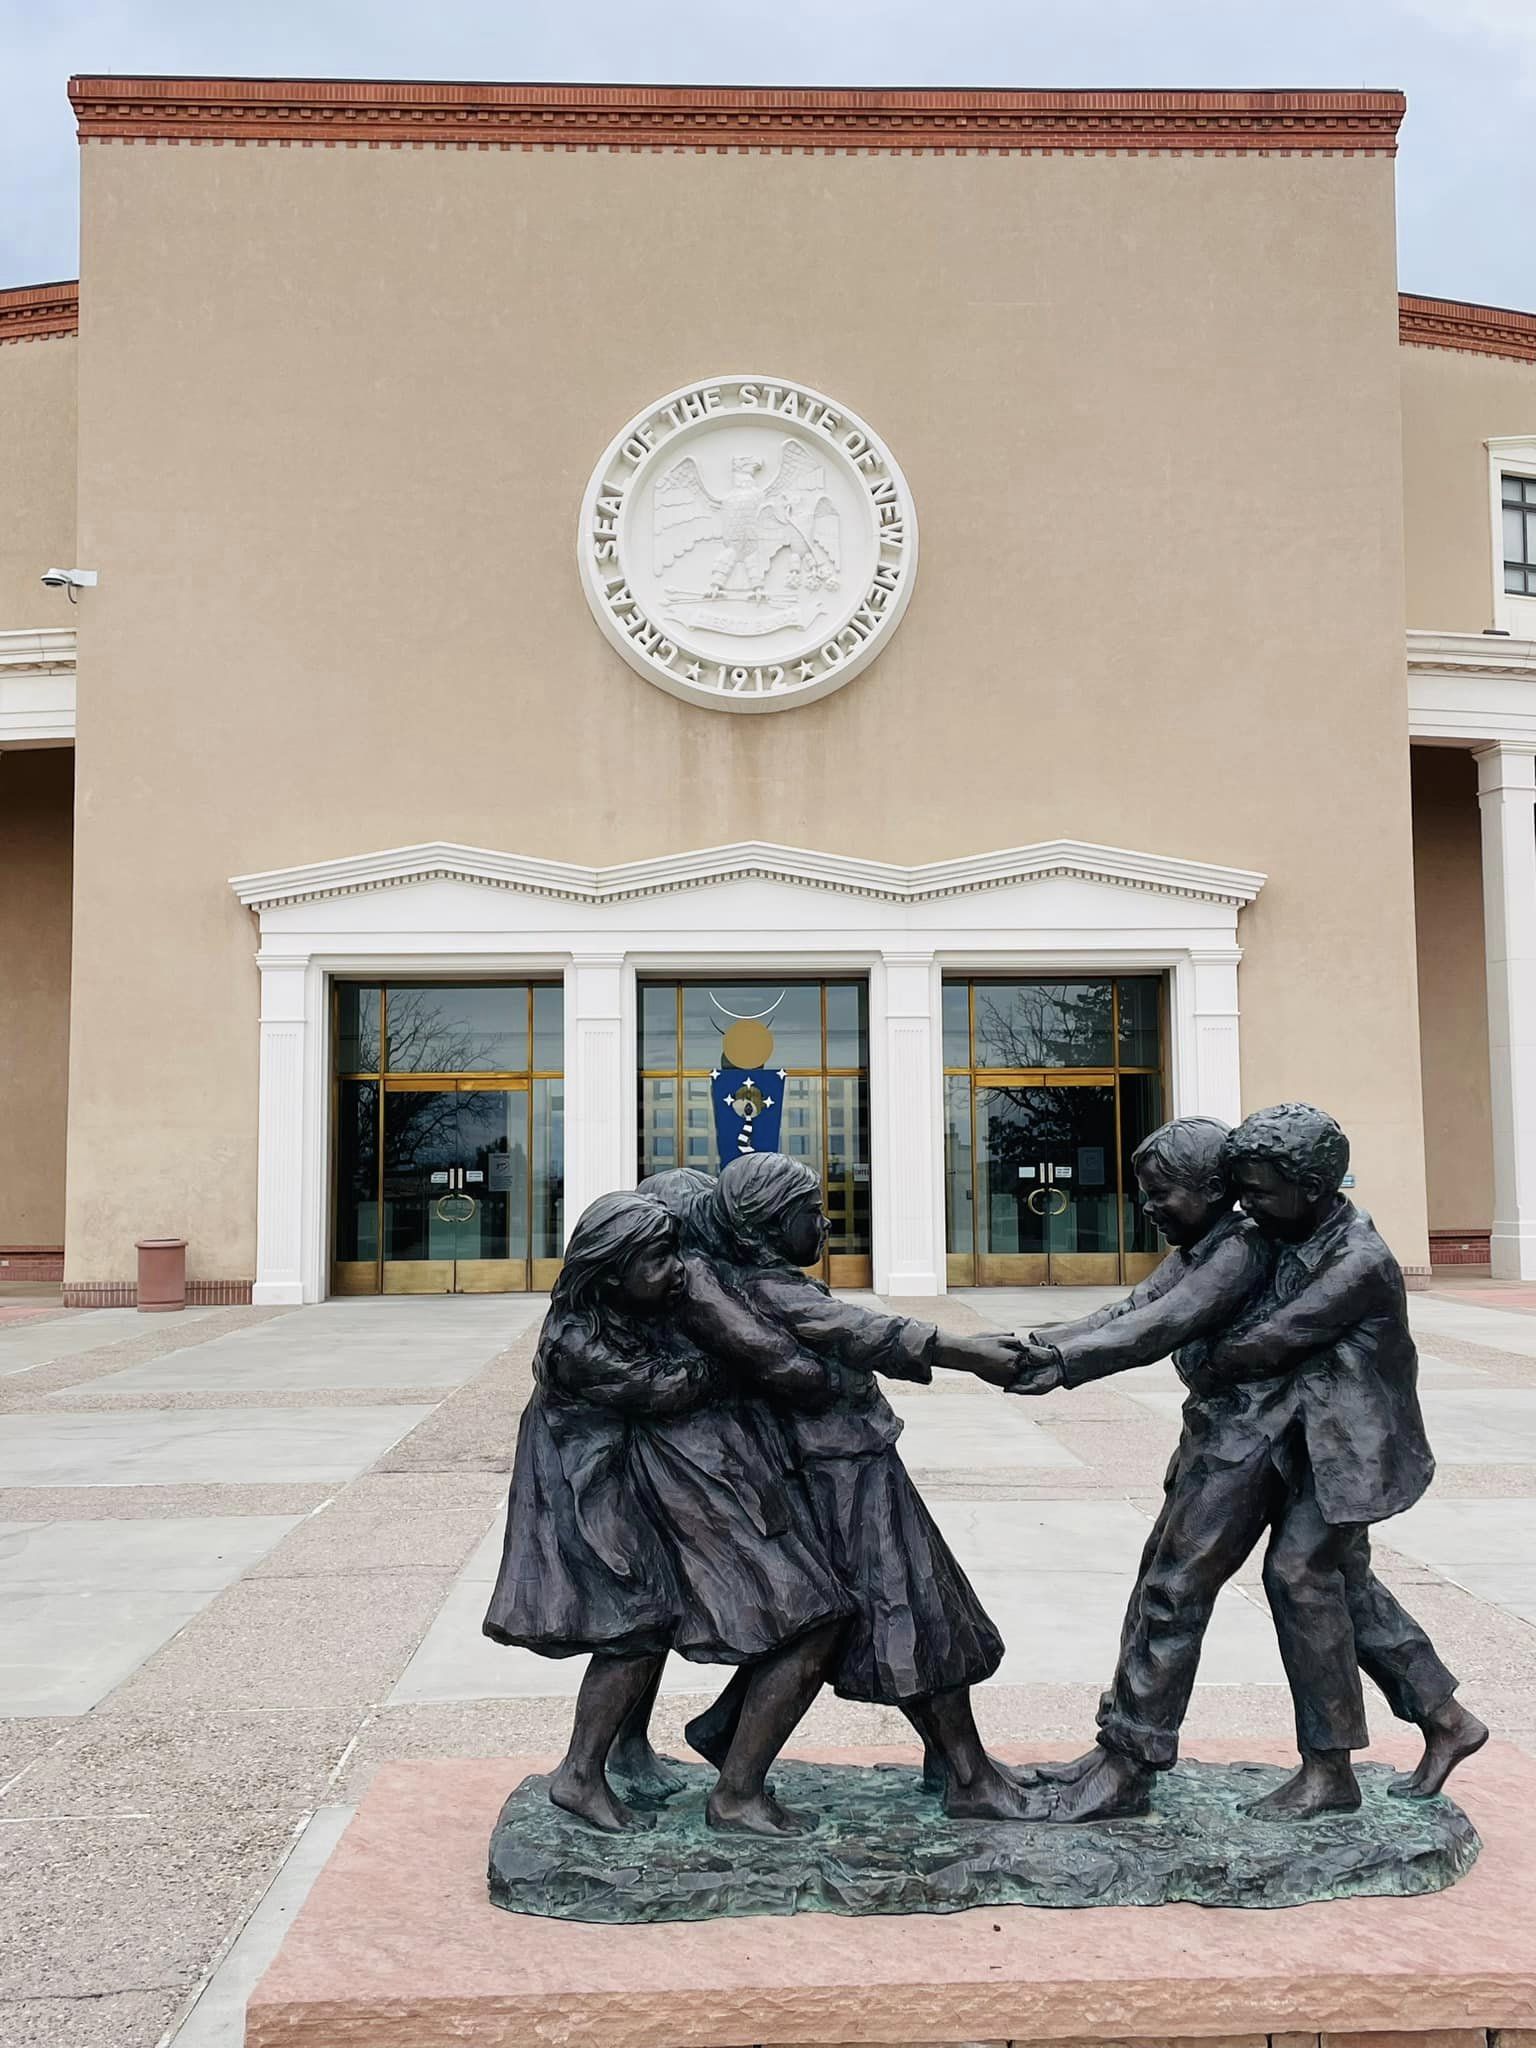 Bronze sculpture of children playing in a ring-around-the-rosy in front of a building with the New Mexico state sea.